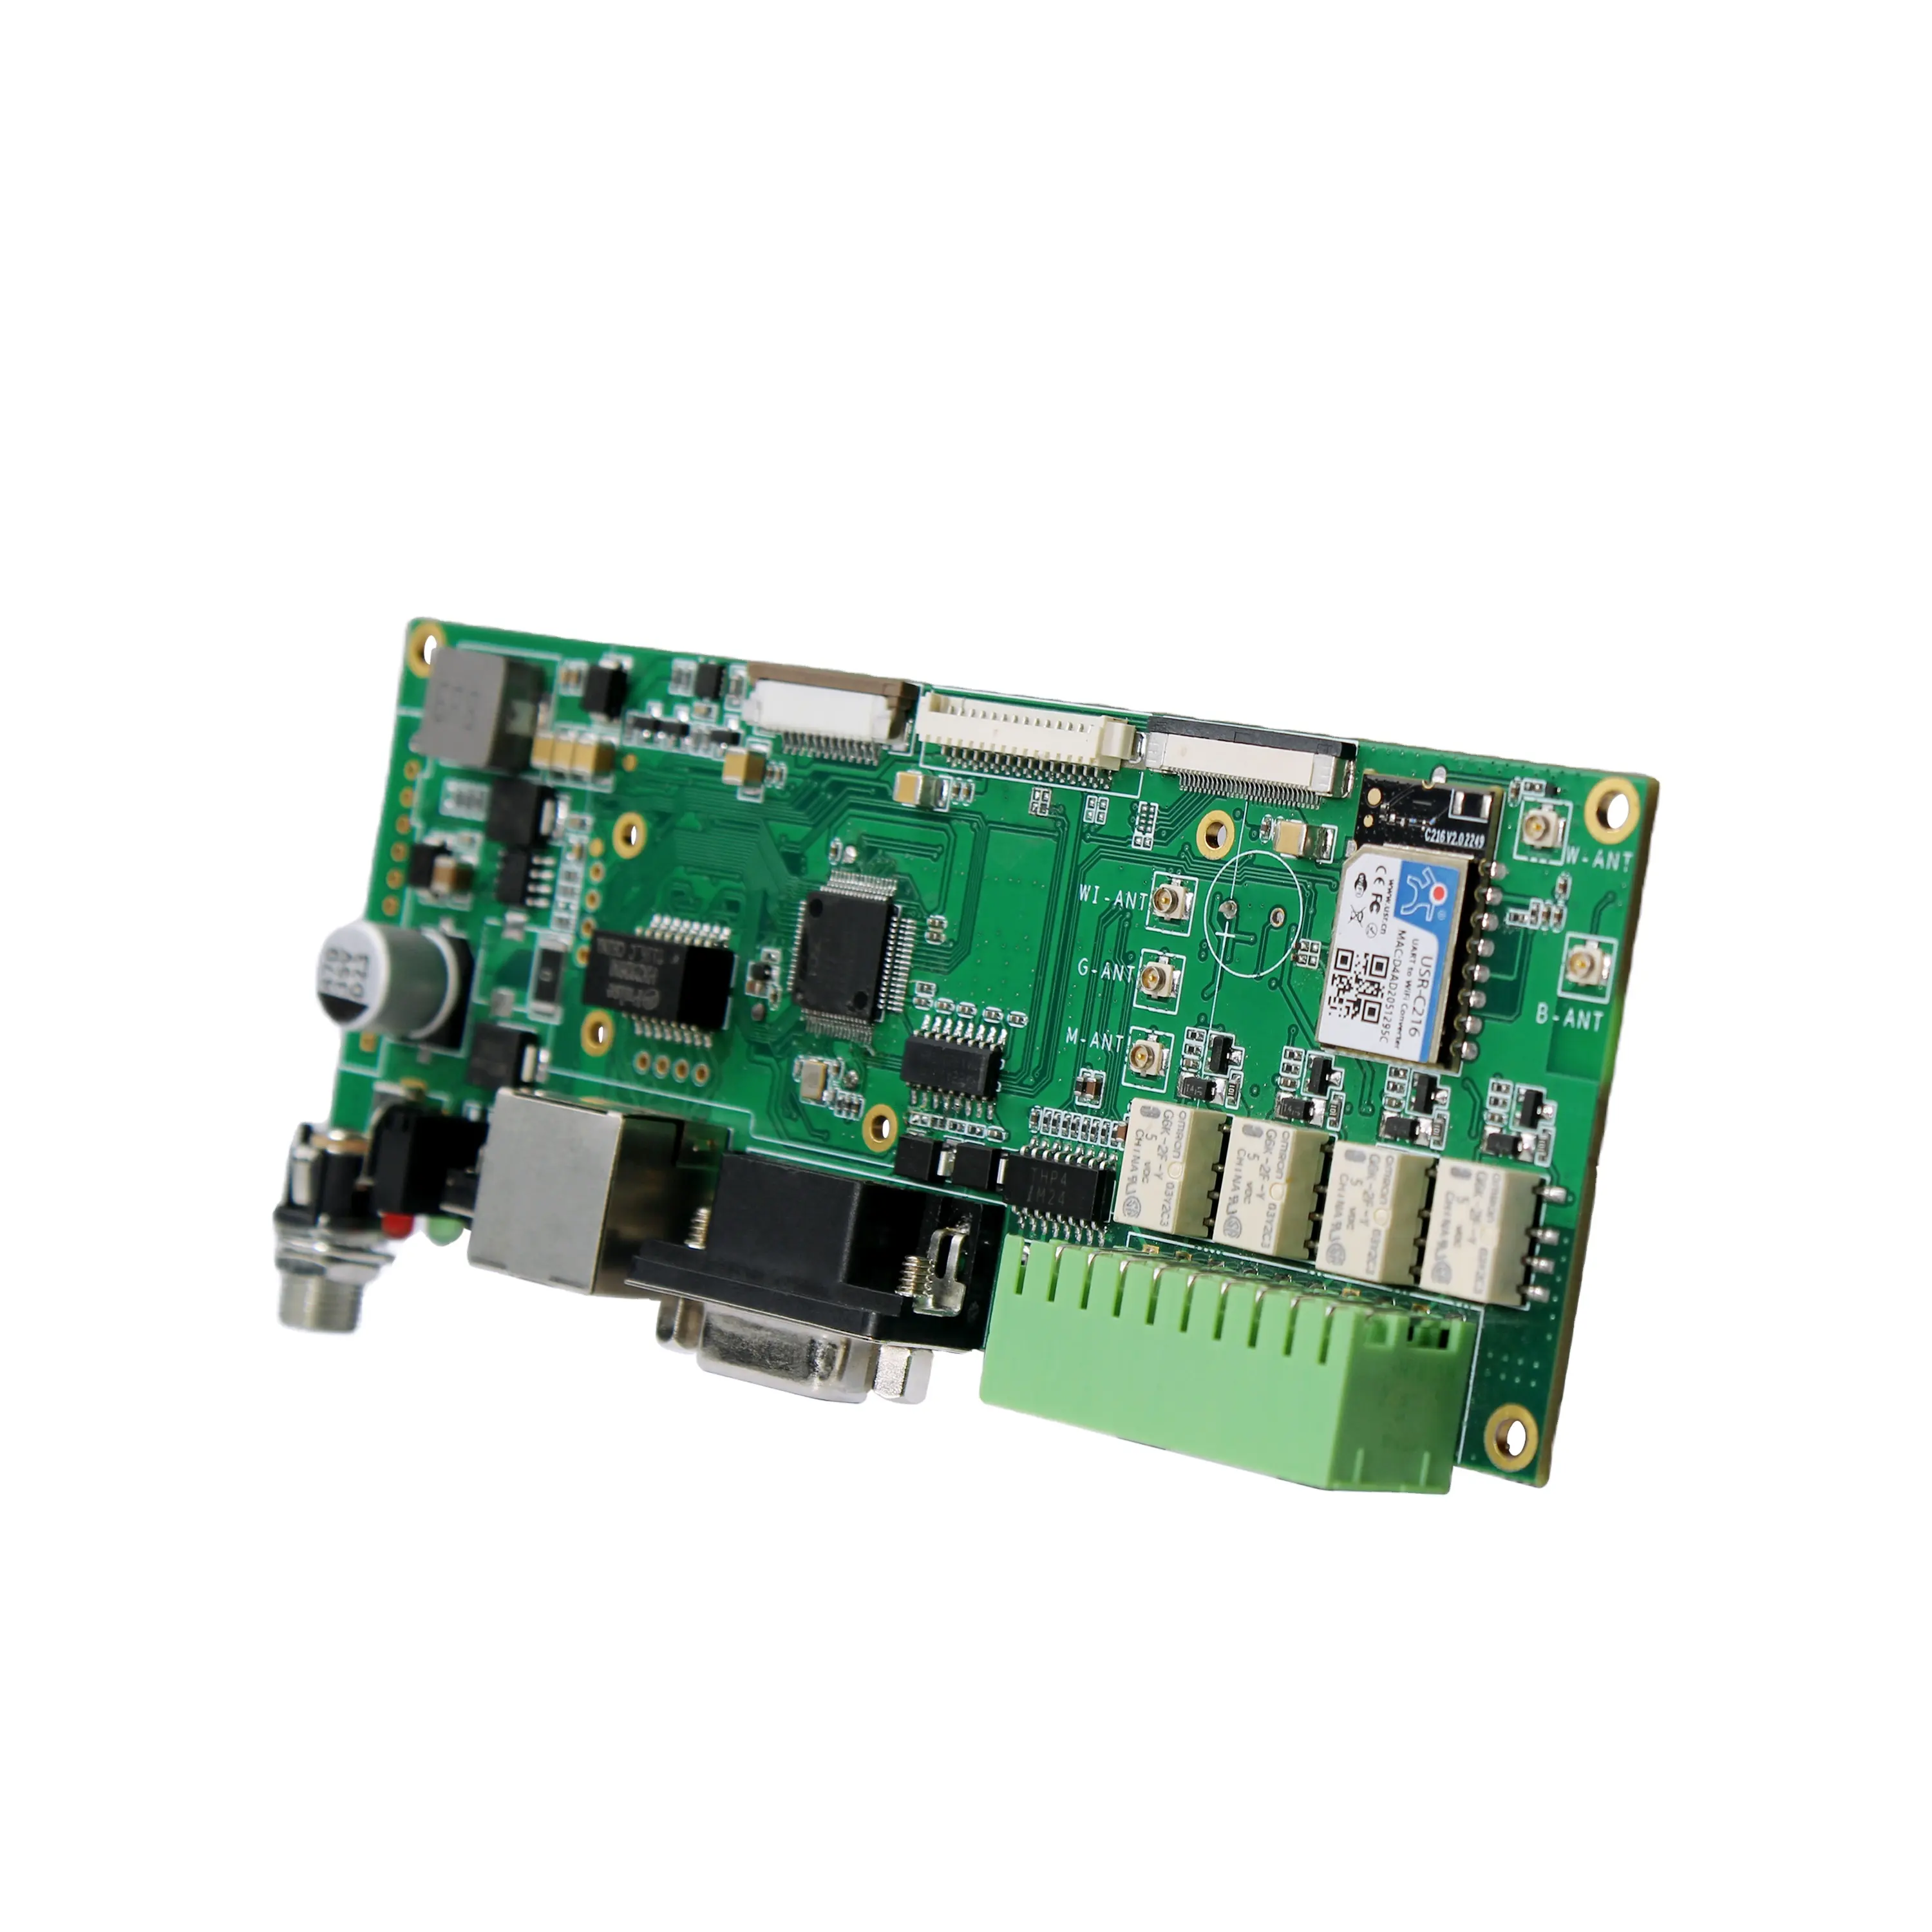 All-function UHF RFID Module Board Adapter Ethernet, RS-232, RS-485, Wiegand, GPI/O UHF RFID Communication Board